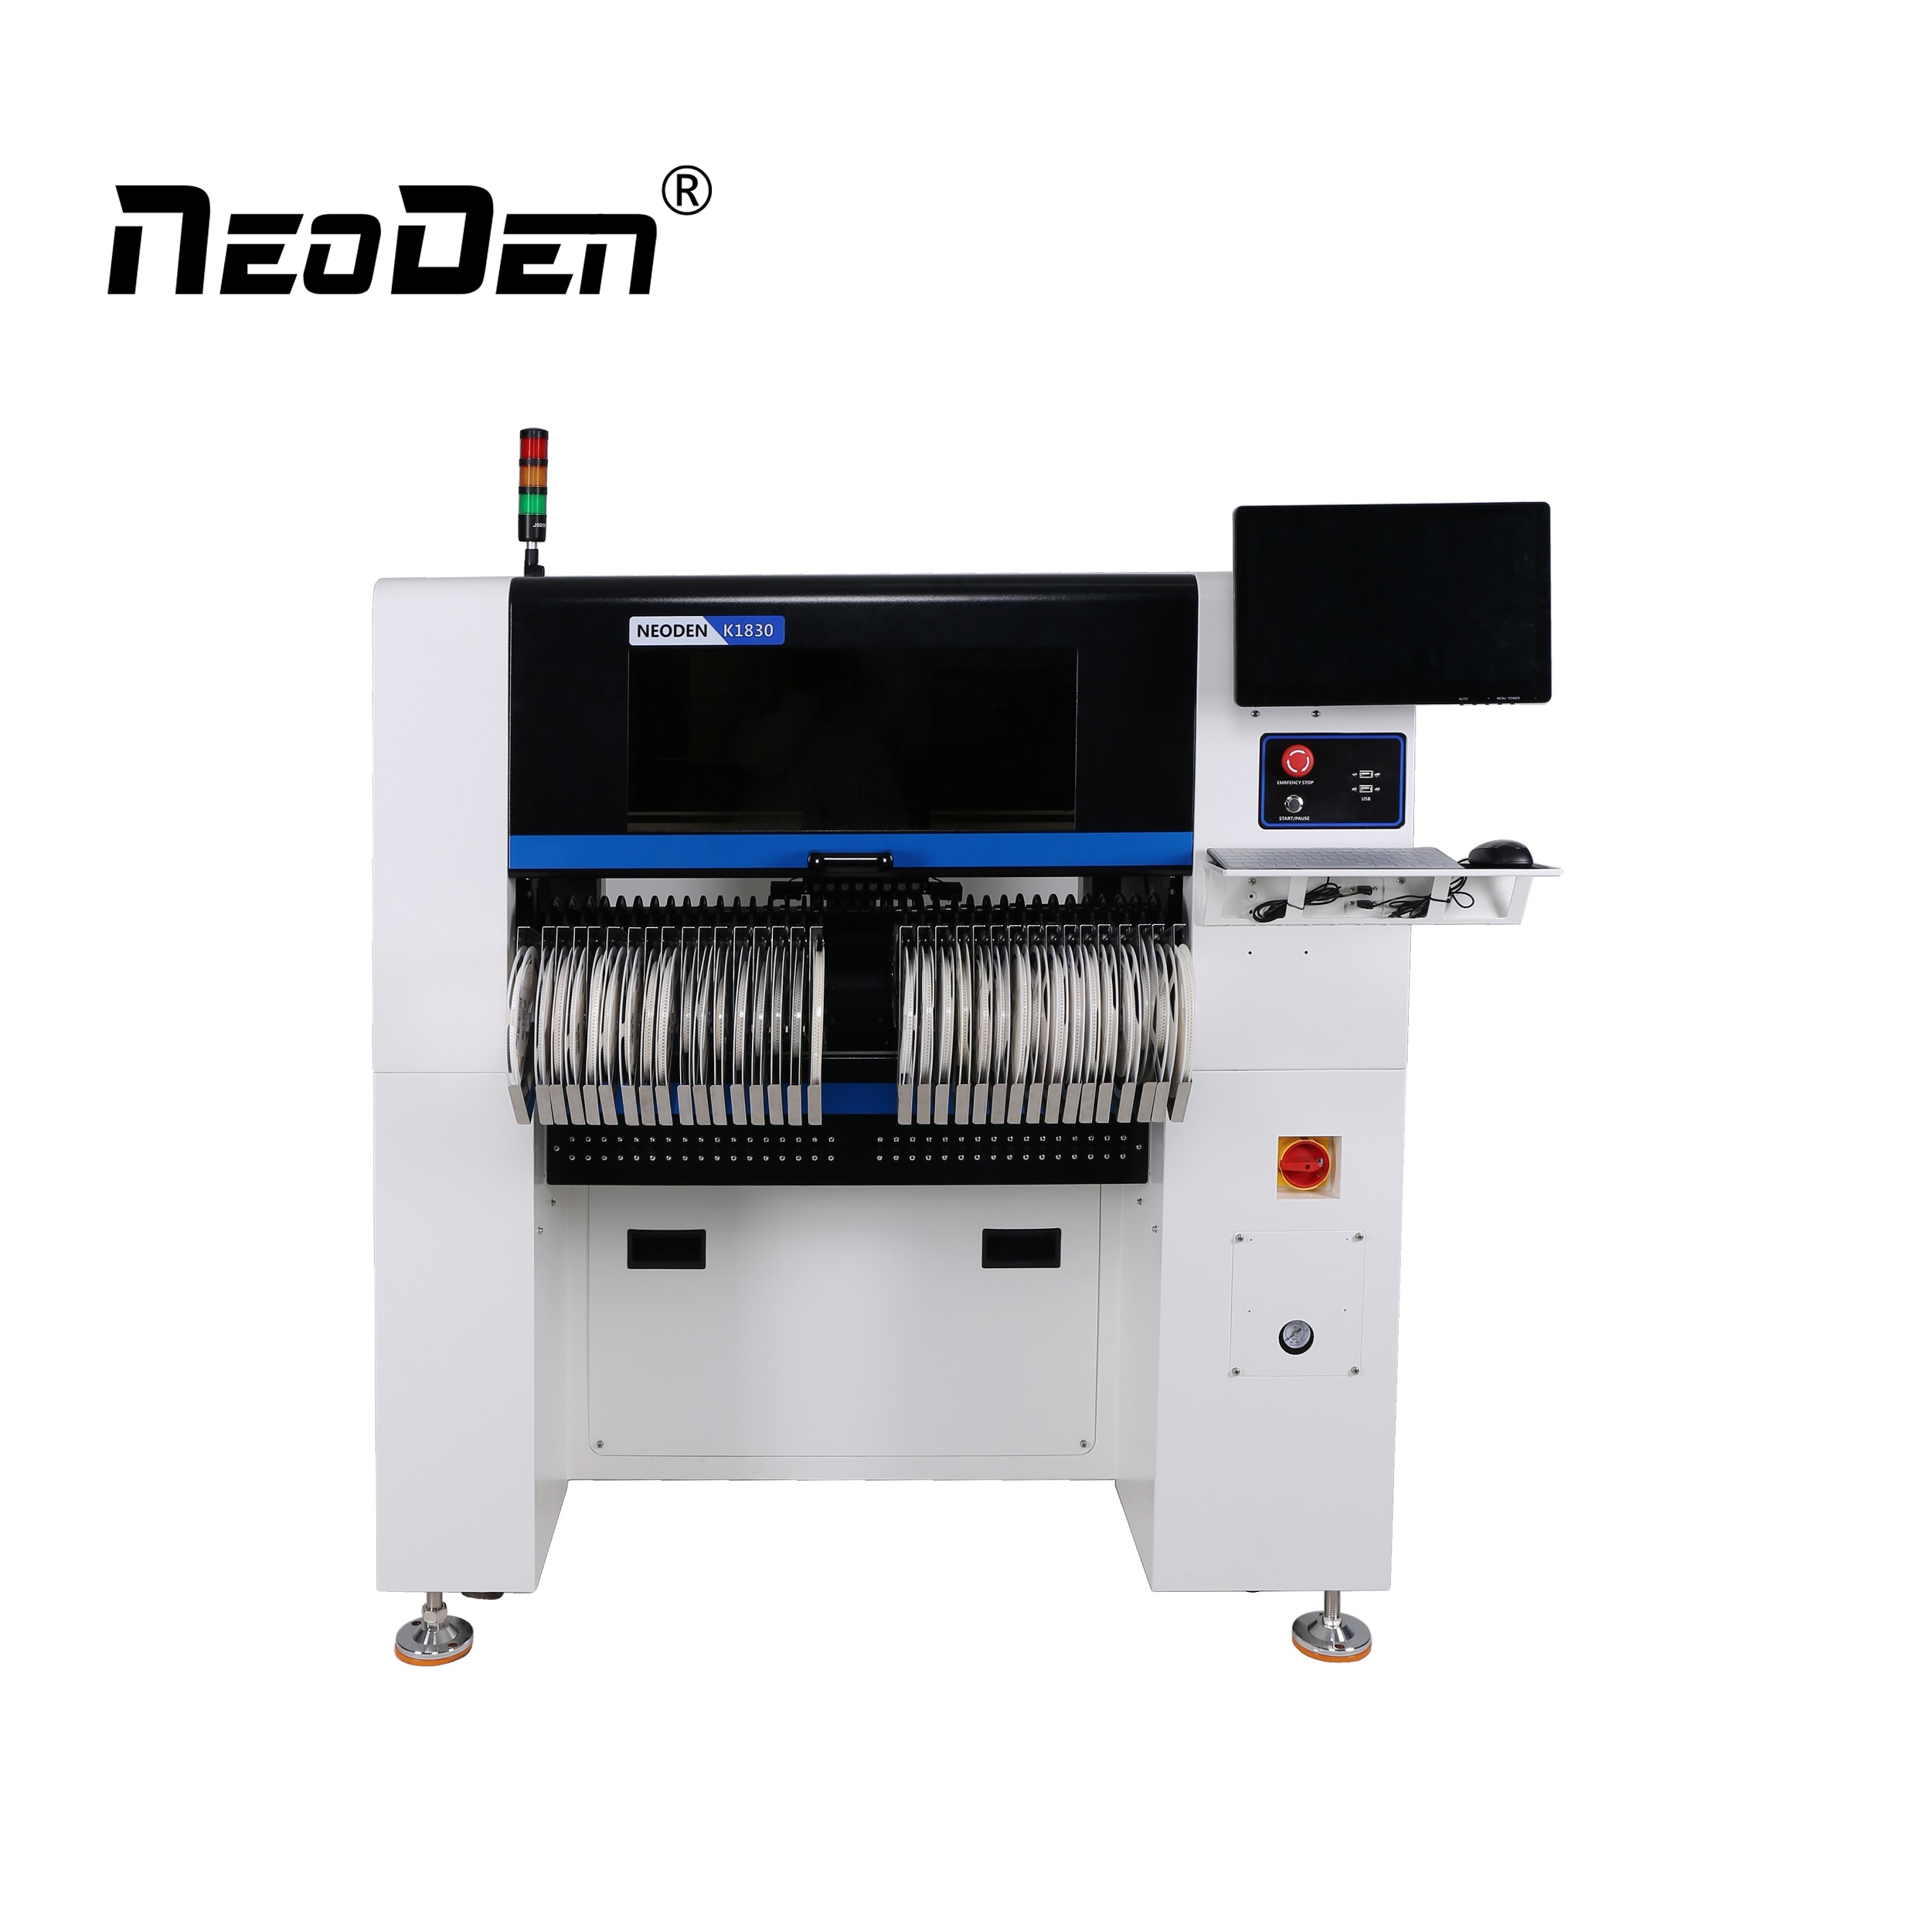 Wholesale Price China Small Pick And Place Robots - Smt Mounter Machine NeoDen K1830 – Neoden